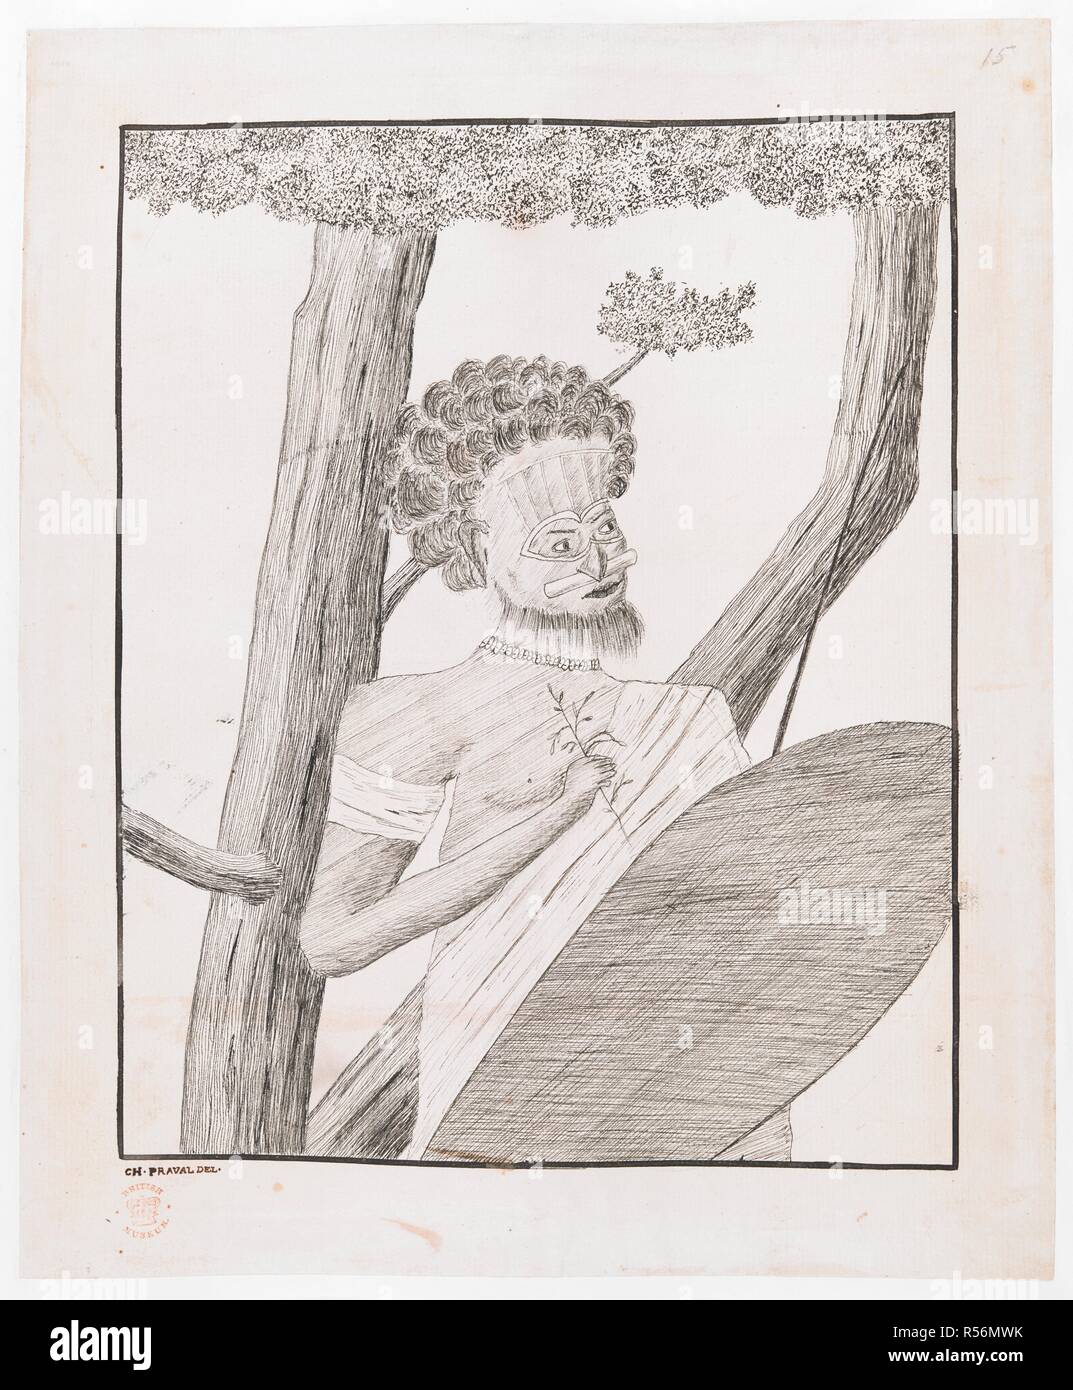 A portrait of an Australian Aborigine. It appears to be a copy of a lost drawing, probably by Sydney Parkinson, made at the Endeavour River, circa December 1770-January 1771. DRAWINGS, in Indian ink, illustrative of Capt. Cook's first voyage, 1768 -1770, chiefly relating to Otaheite and New Zealand, by A. Buchan, John F. Miller, and others. circa 1770-1771. Dimensions: 267 x 216. Source: Add. 15508, f.13, no.15. Language: English. Author: PRAVAL, CHARLES. Stock Photo